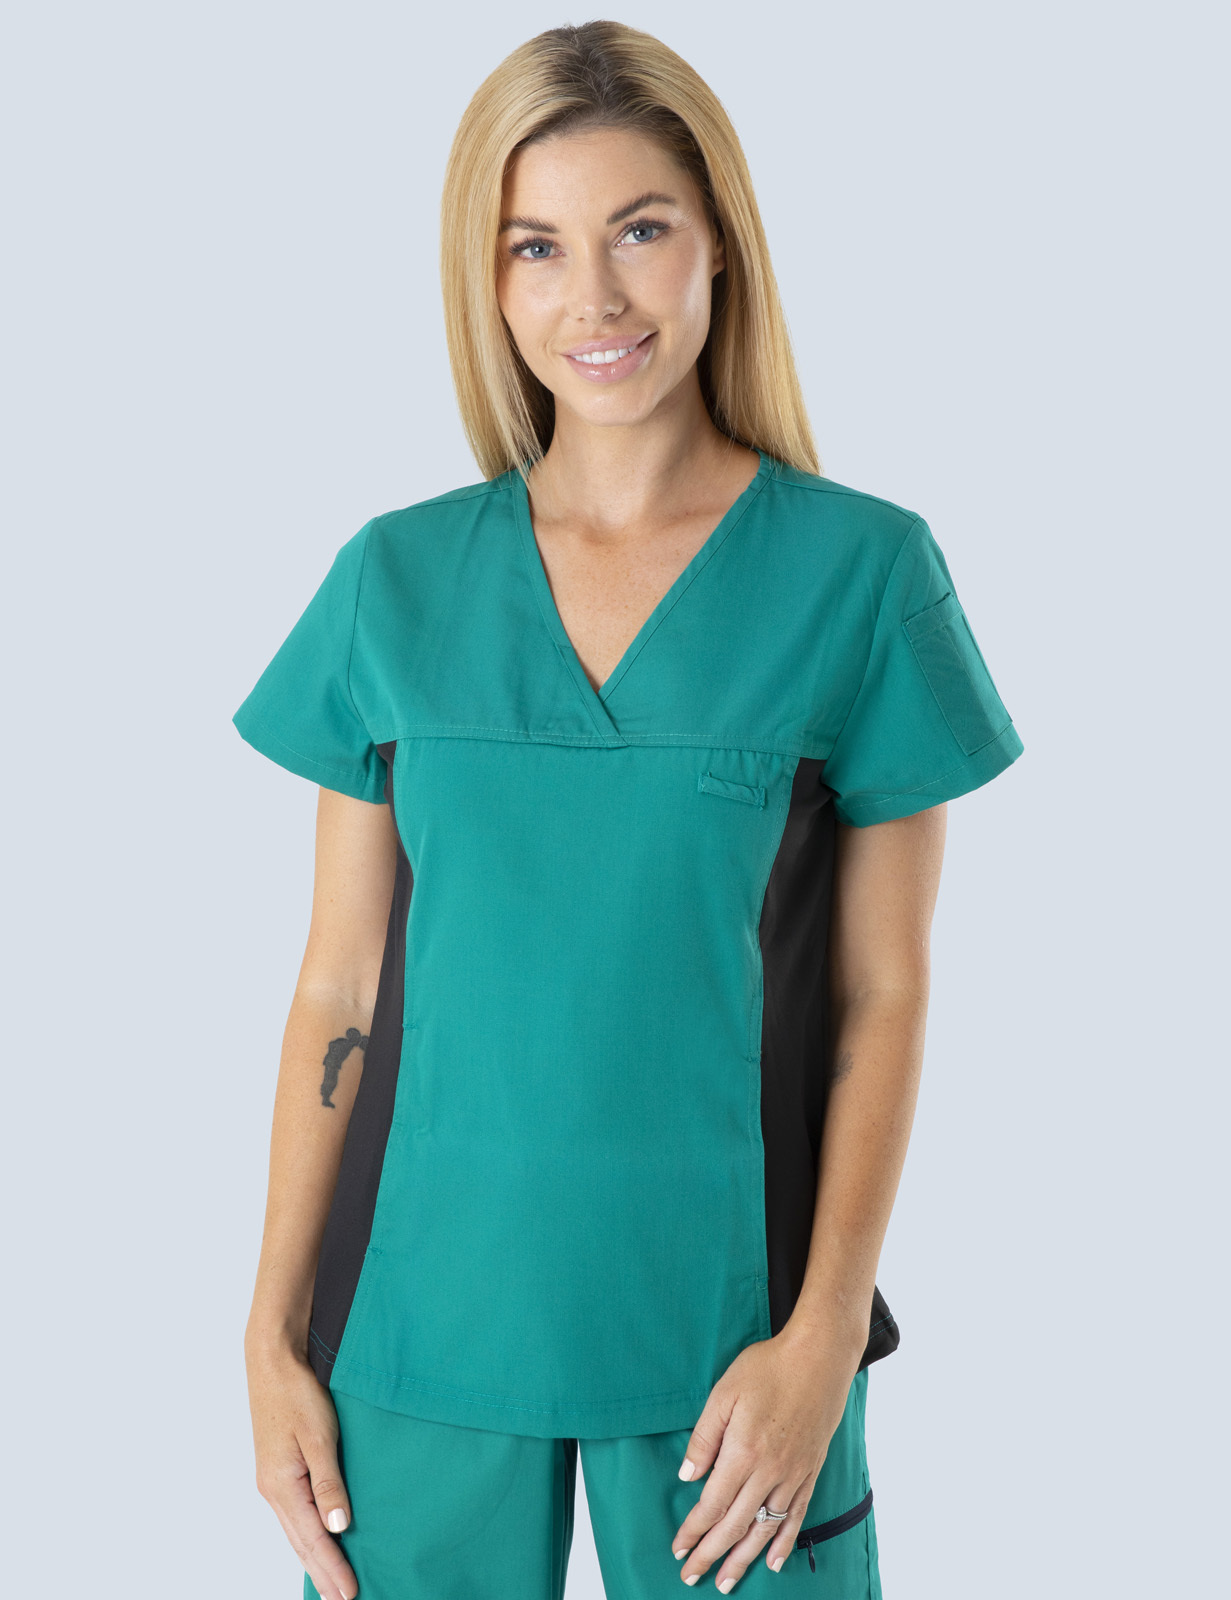 Ashmore Retreat Endorsed Enrolled Nurse Top Only Bundle (Women's Fit Spandex in Hunter incl Logo) 